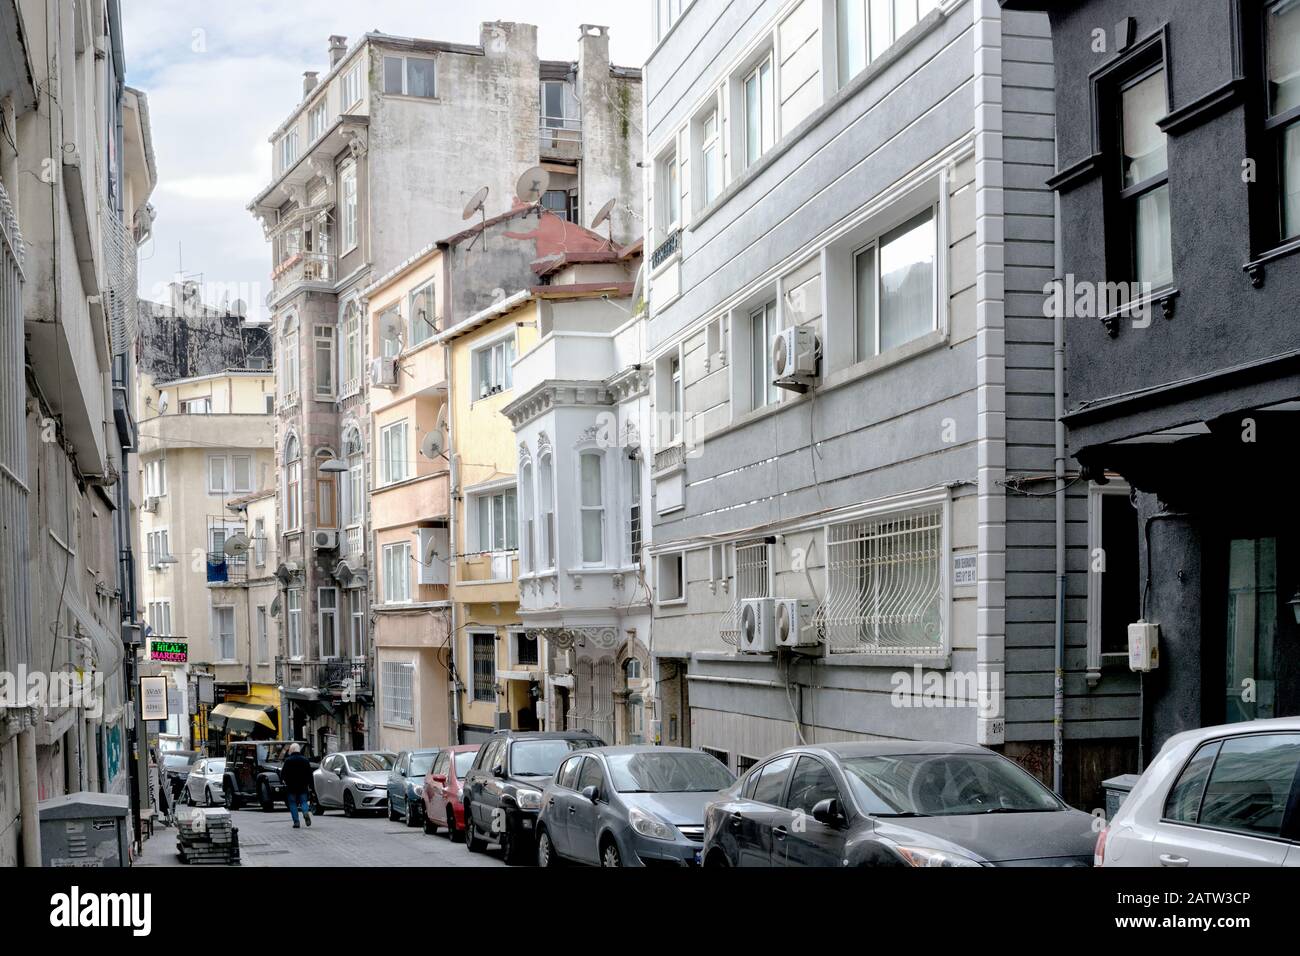 Istanbul, Turkey - January 15, 2020: a narrow street in Istanbul, lined with old and new buildings Stock Photo